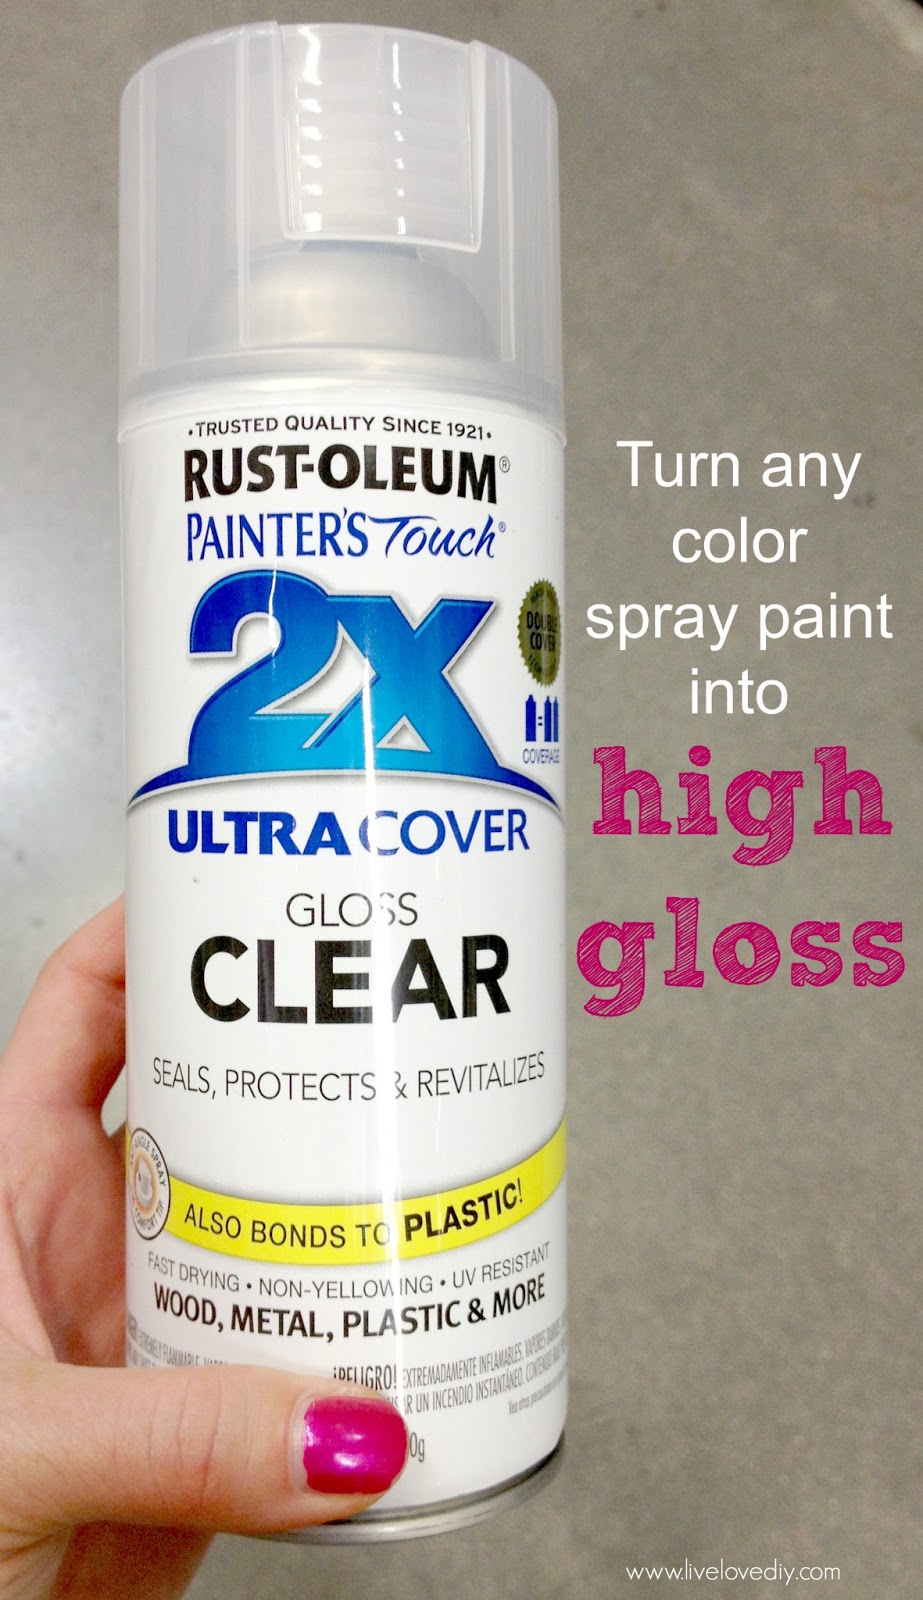 10 Spray Paint Tips: what you never knew about spray paint (like how to  spray paint holiday decor!). So good to know!…